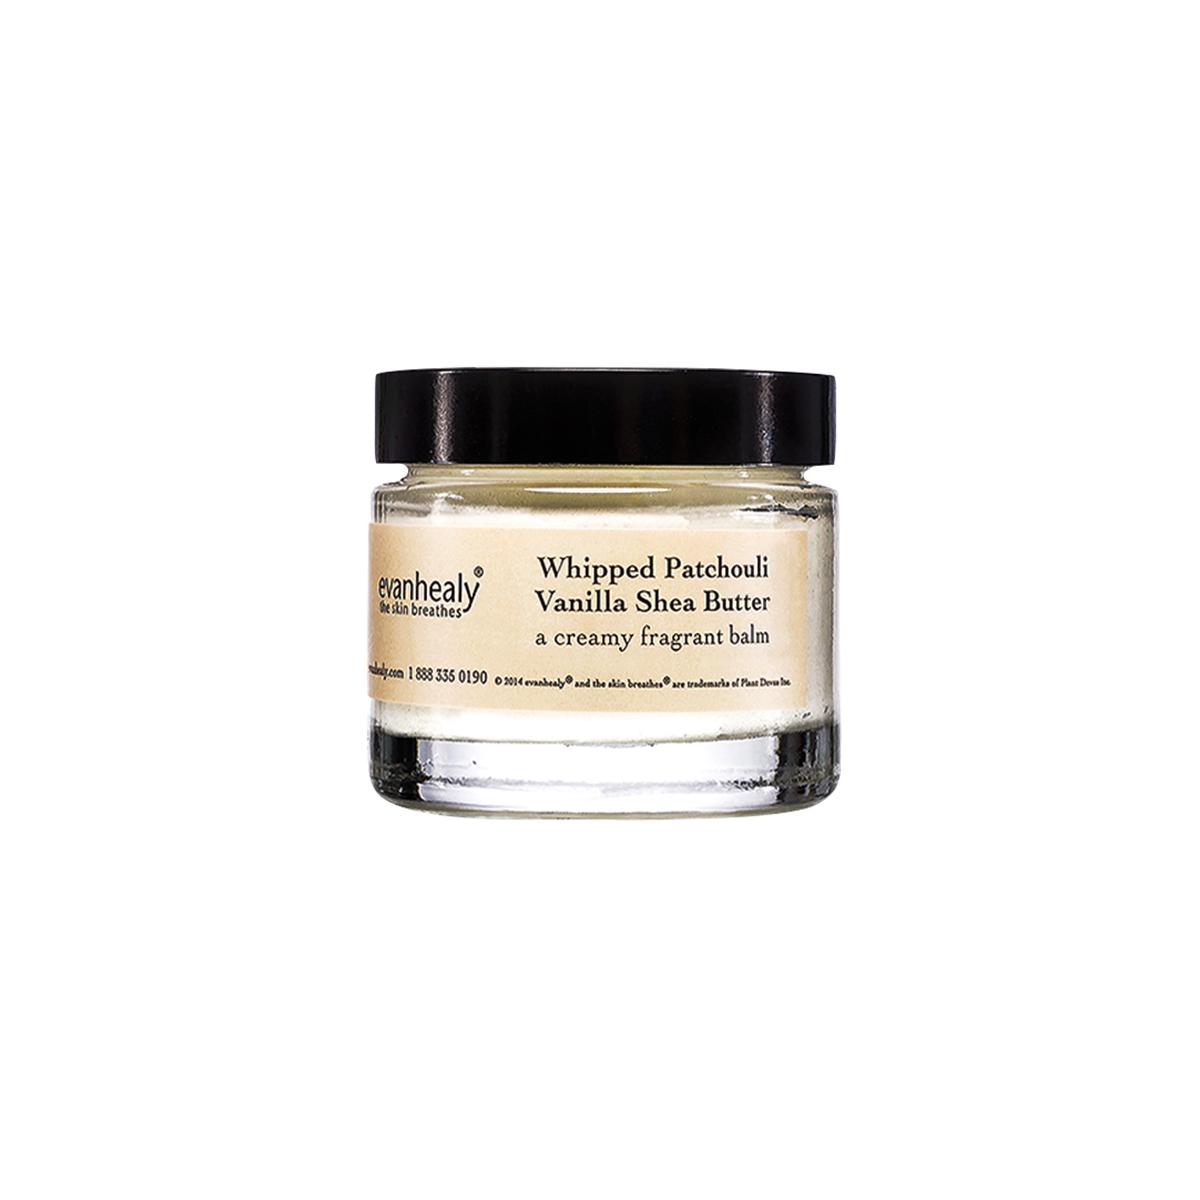 Primary image of Whipped Patchouli Vanilla Shea Butter